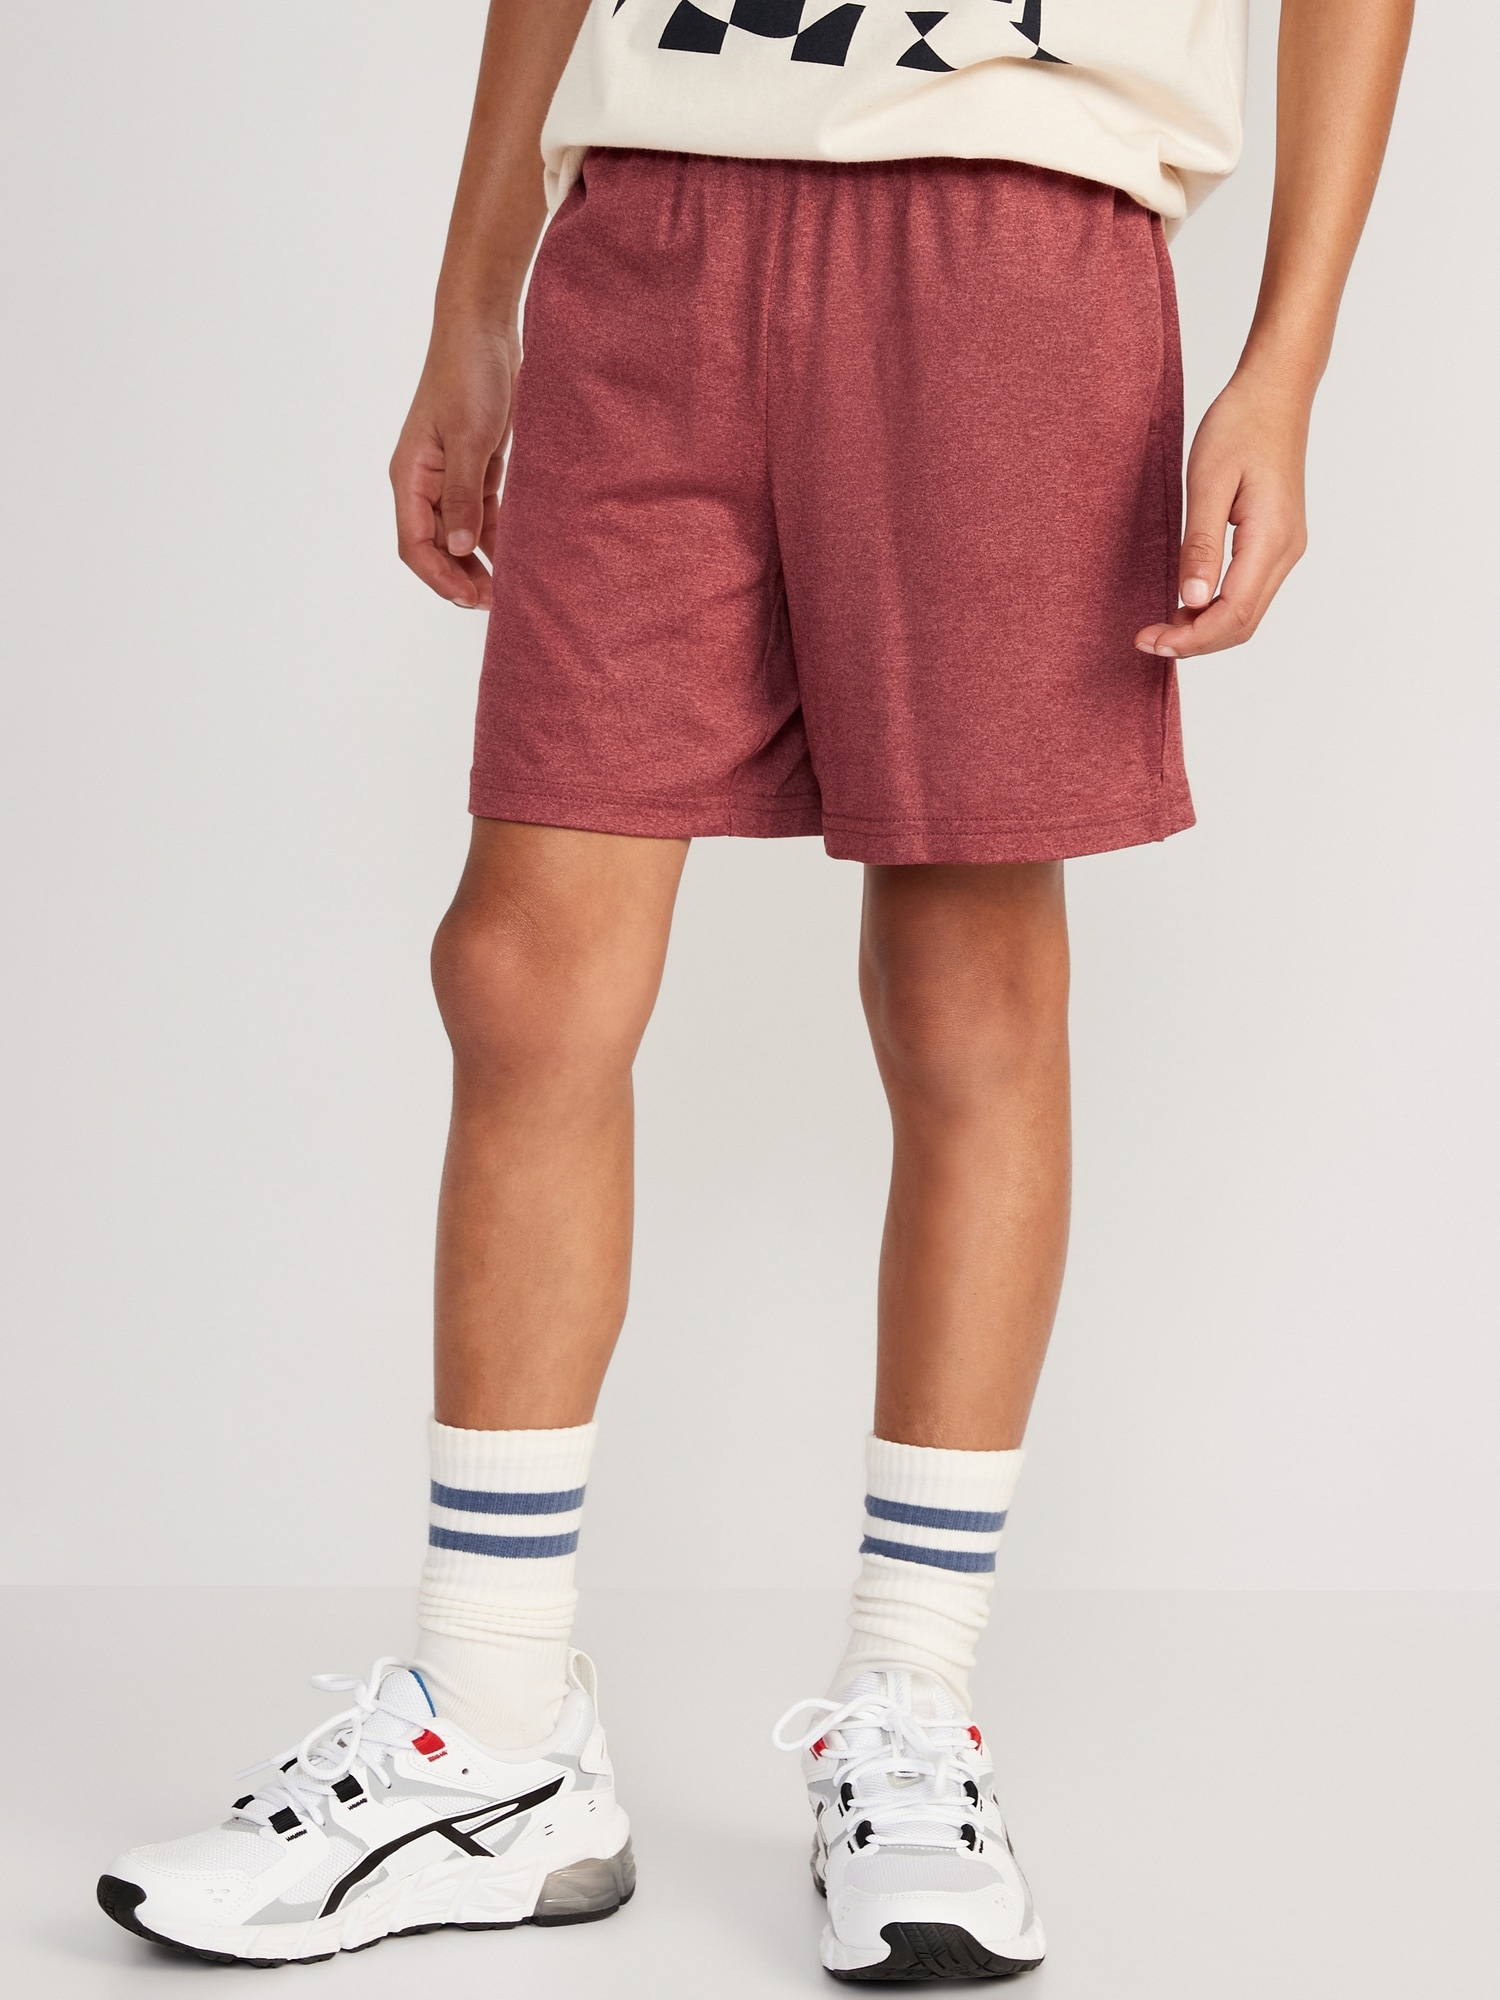 Old Navy Cloud 94 Soft Go-Dry Cool Performance Shorts for Boys (Above Knee) red. 1